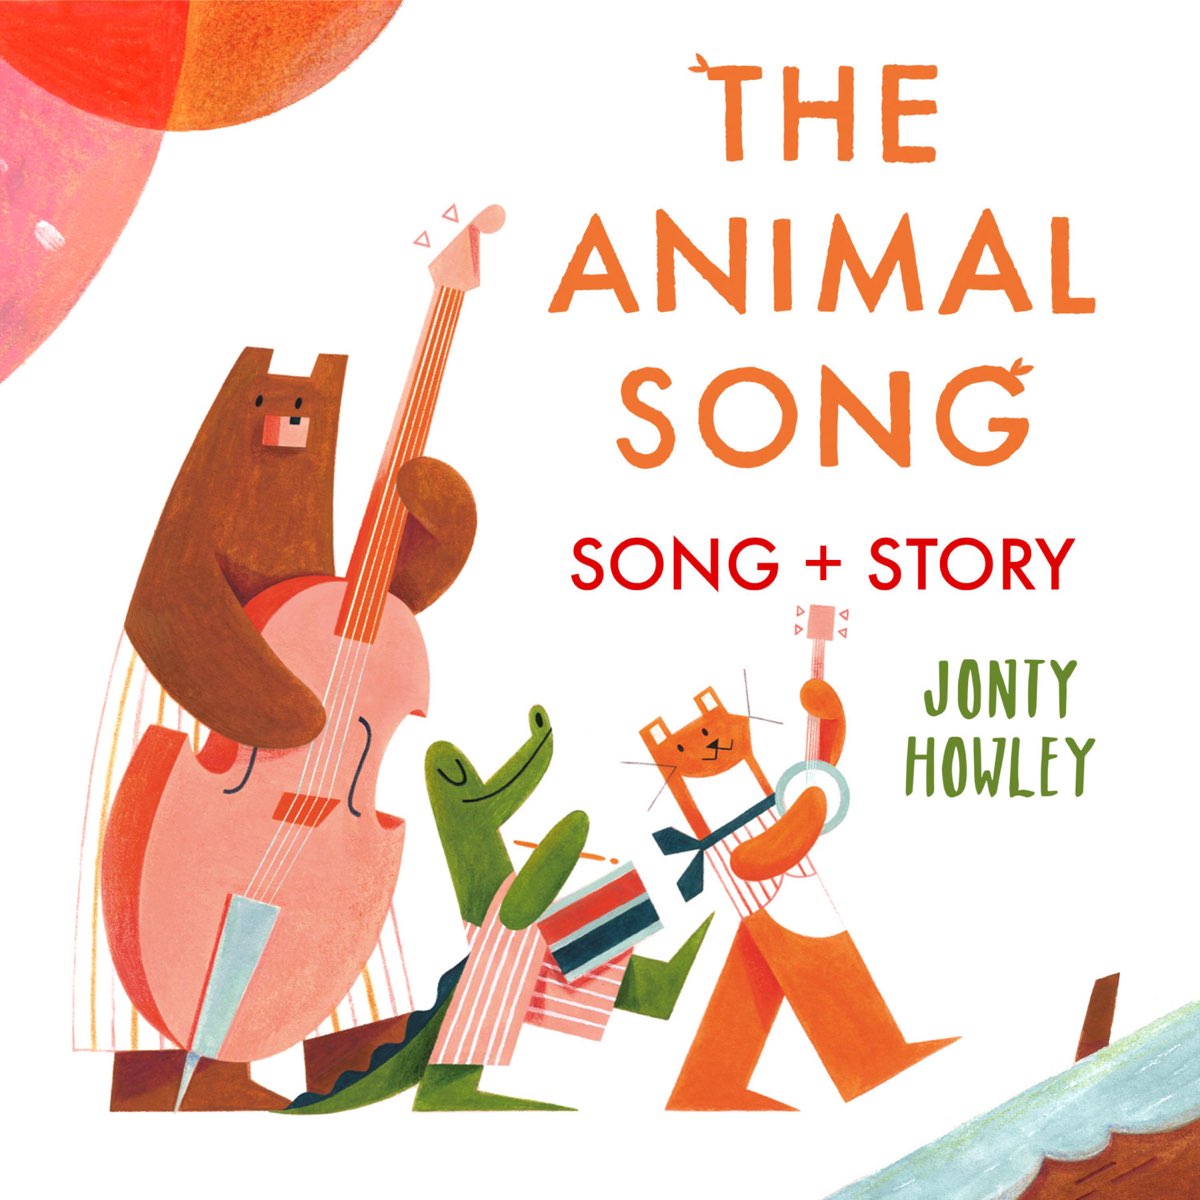 The Animal Song (Song and Story) - Single by Jonty Howley on Apple Music